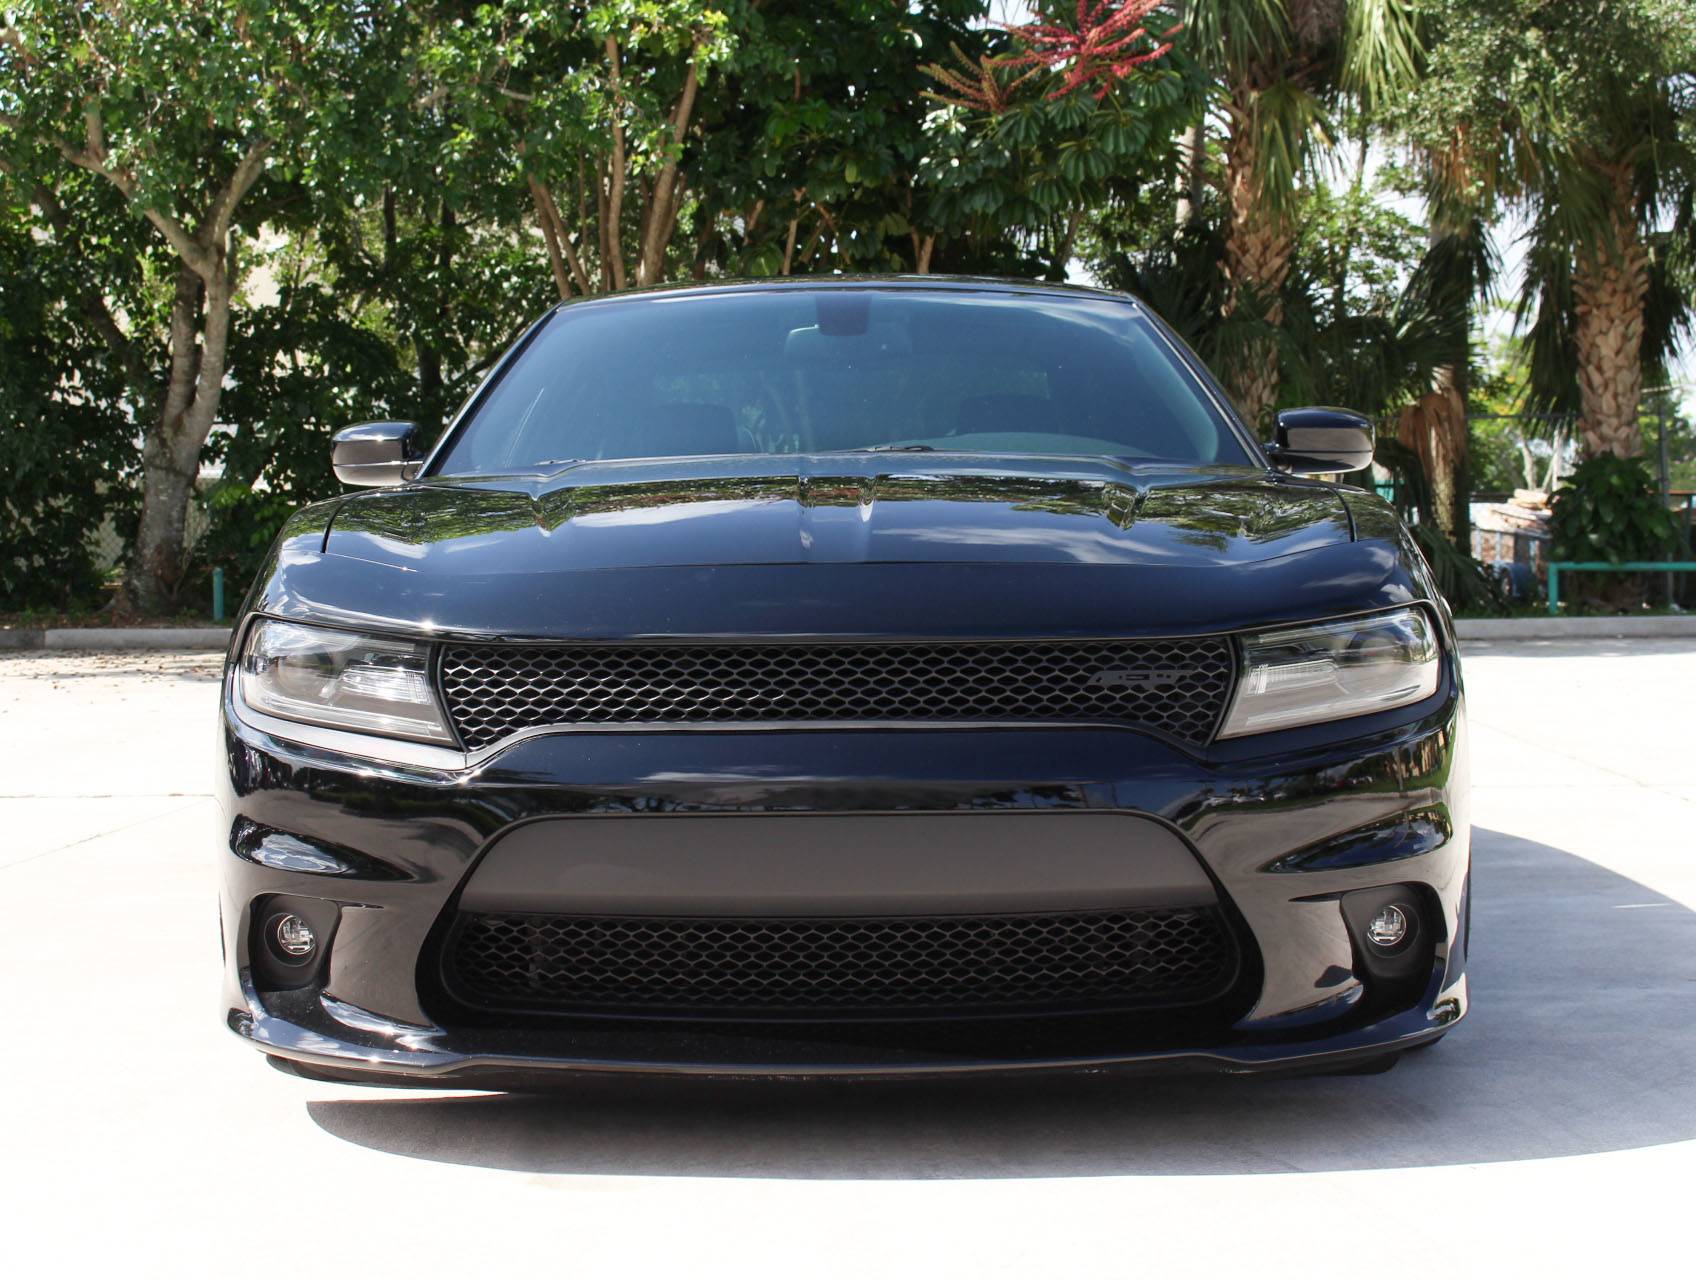 Florida Fine Cars - Used DODGE CHARGER 2015 MIAMI R/t Road & Track